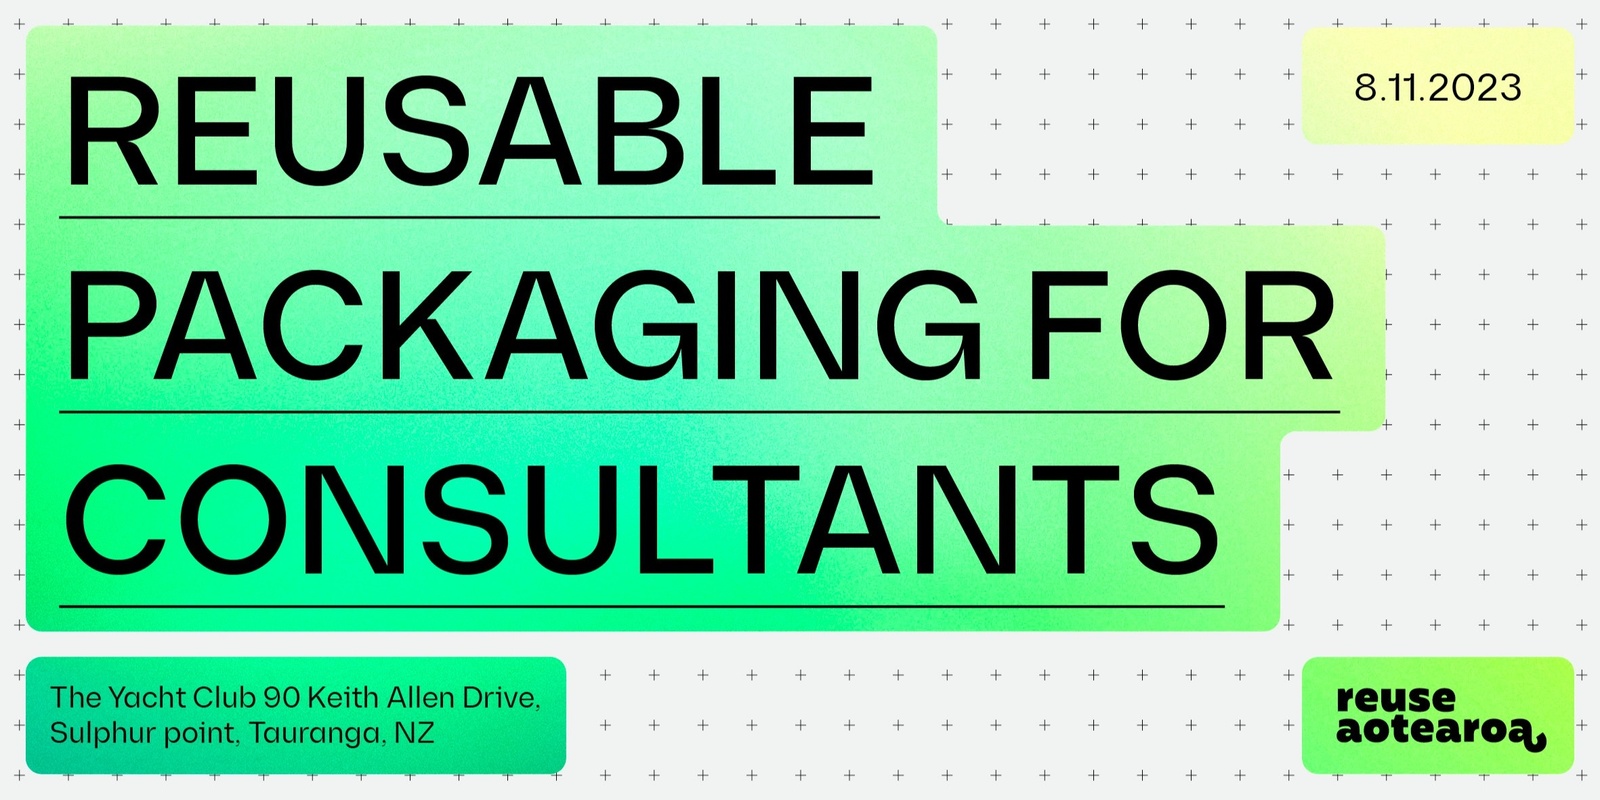 Banner image for Reusable Packaging for Consultants